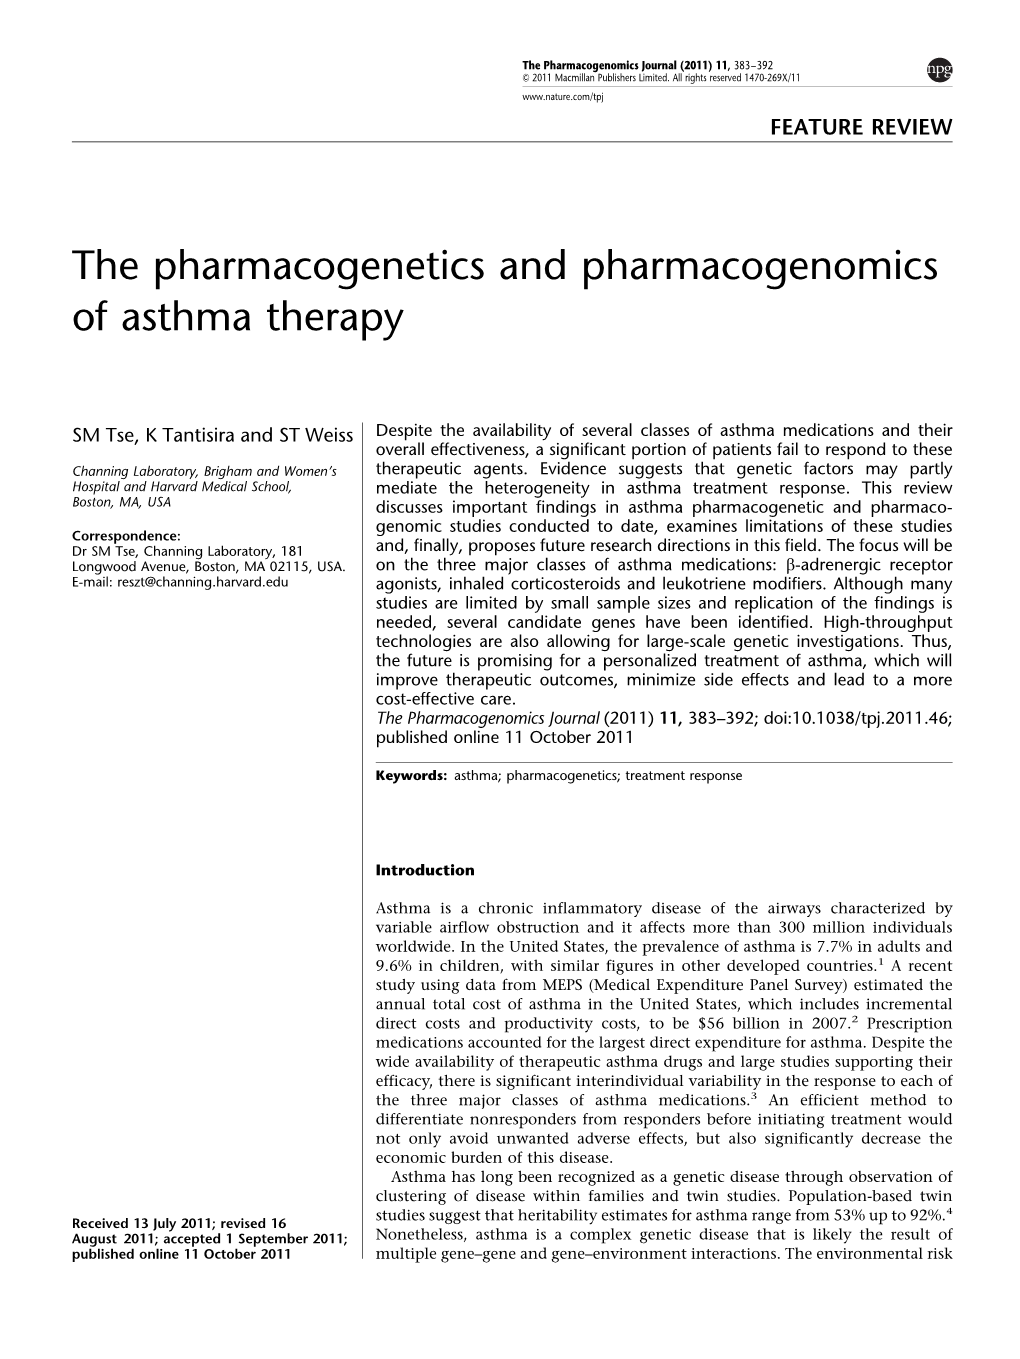 The Pharmacogenetics and Pharmacogenomics of Asthma Therapy